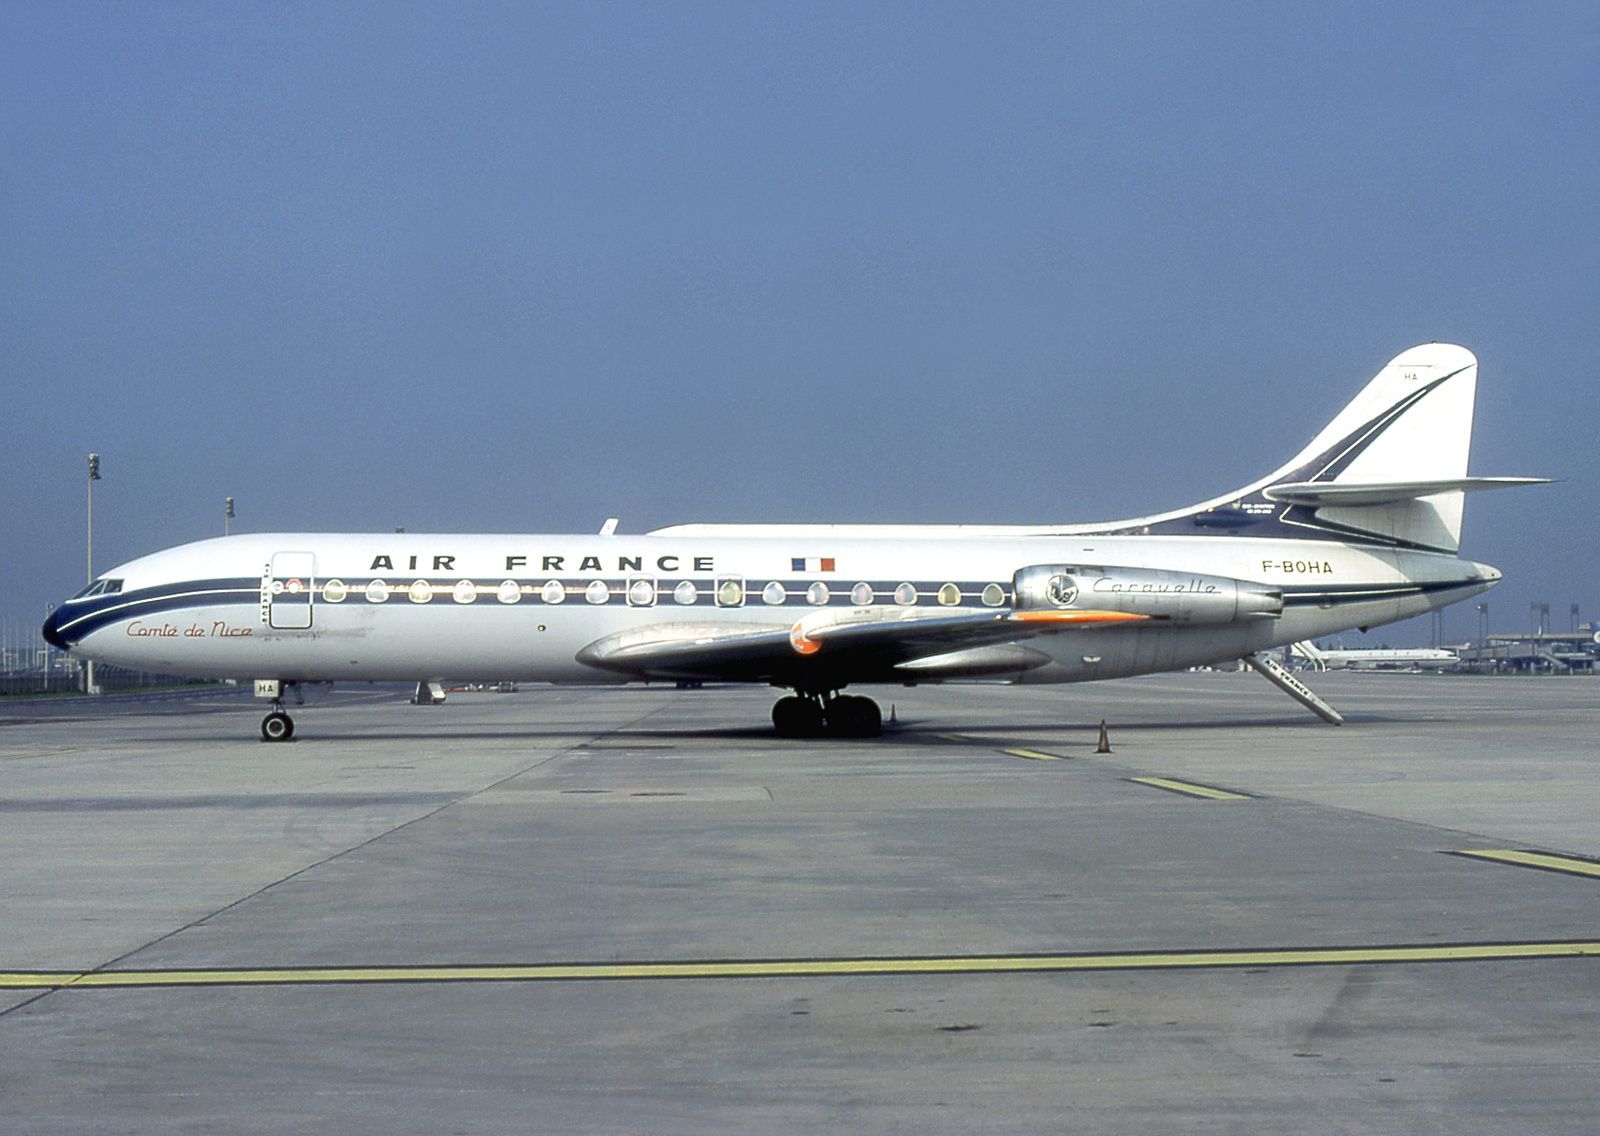 An Air France Sud SE-210 Caravelle III on the taxiway.